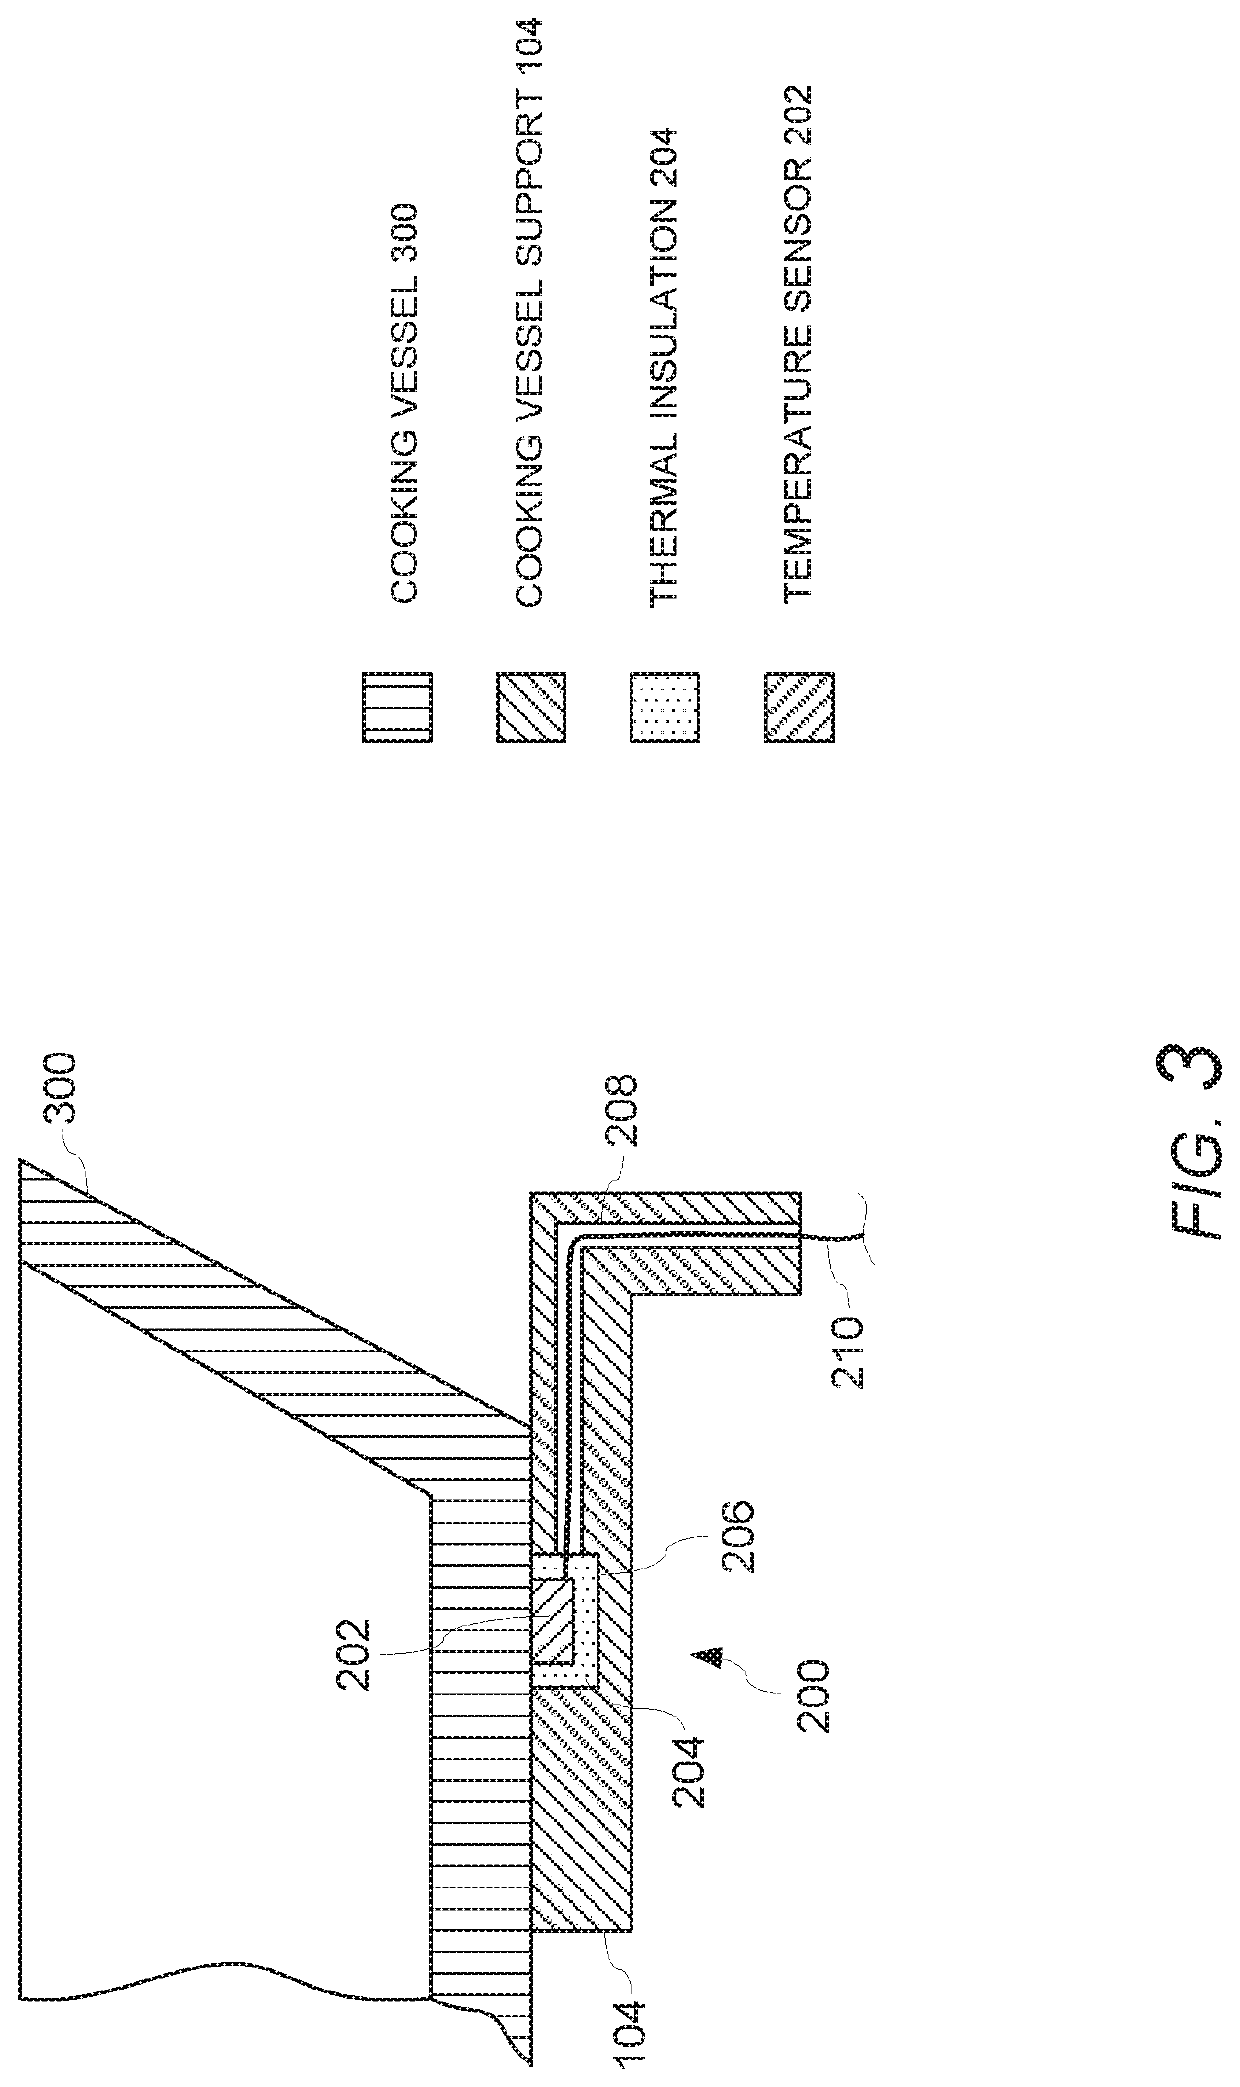 Cooking vessel support system having an integral cooking vessel temperature monitoring and fire prevention system